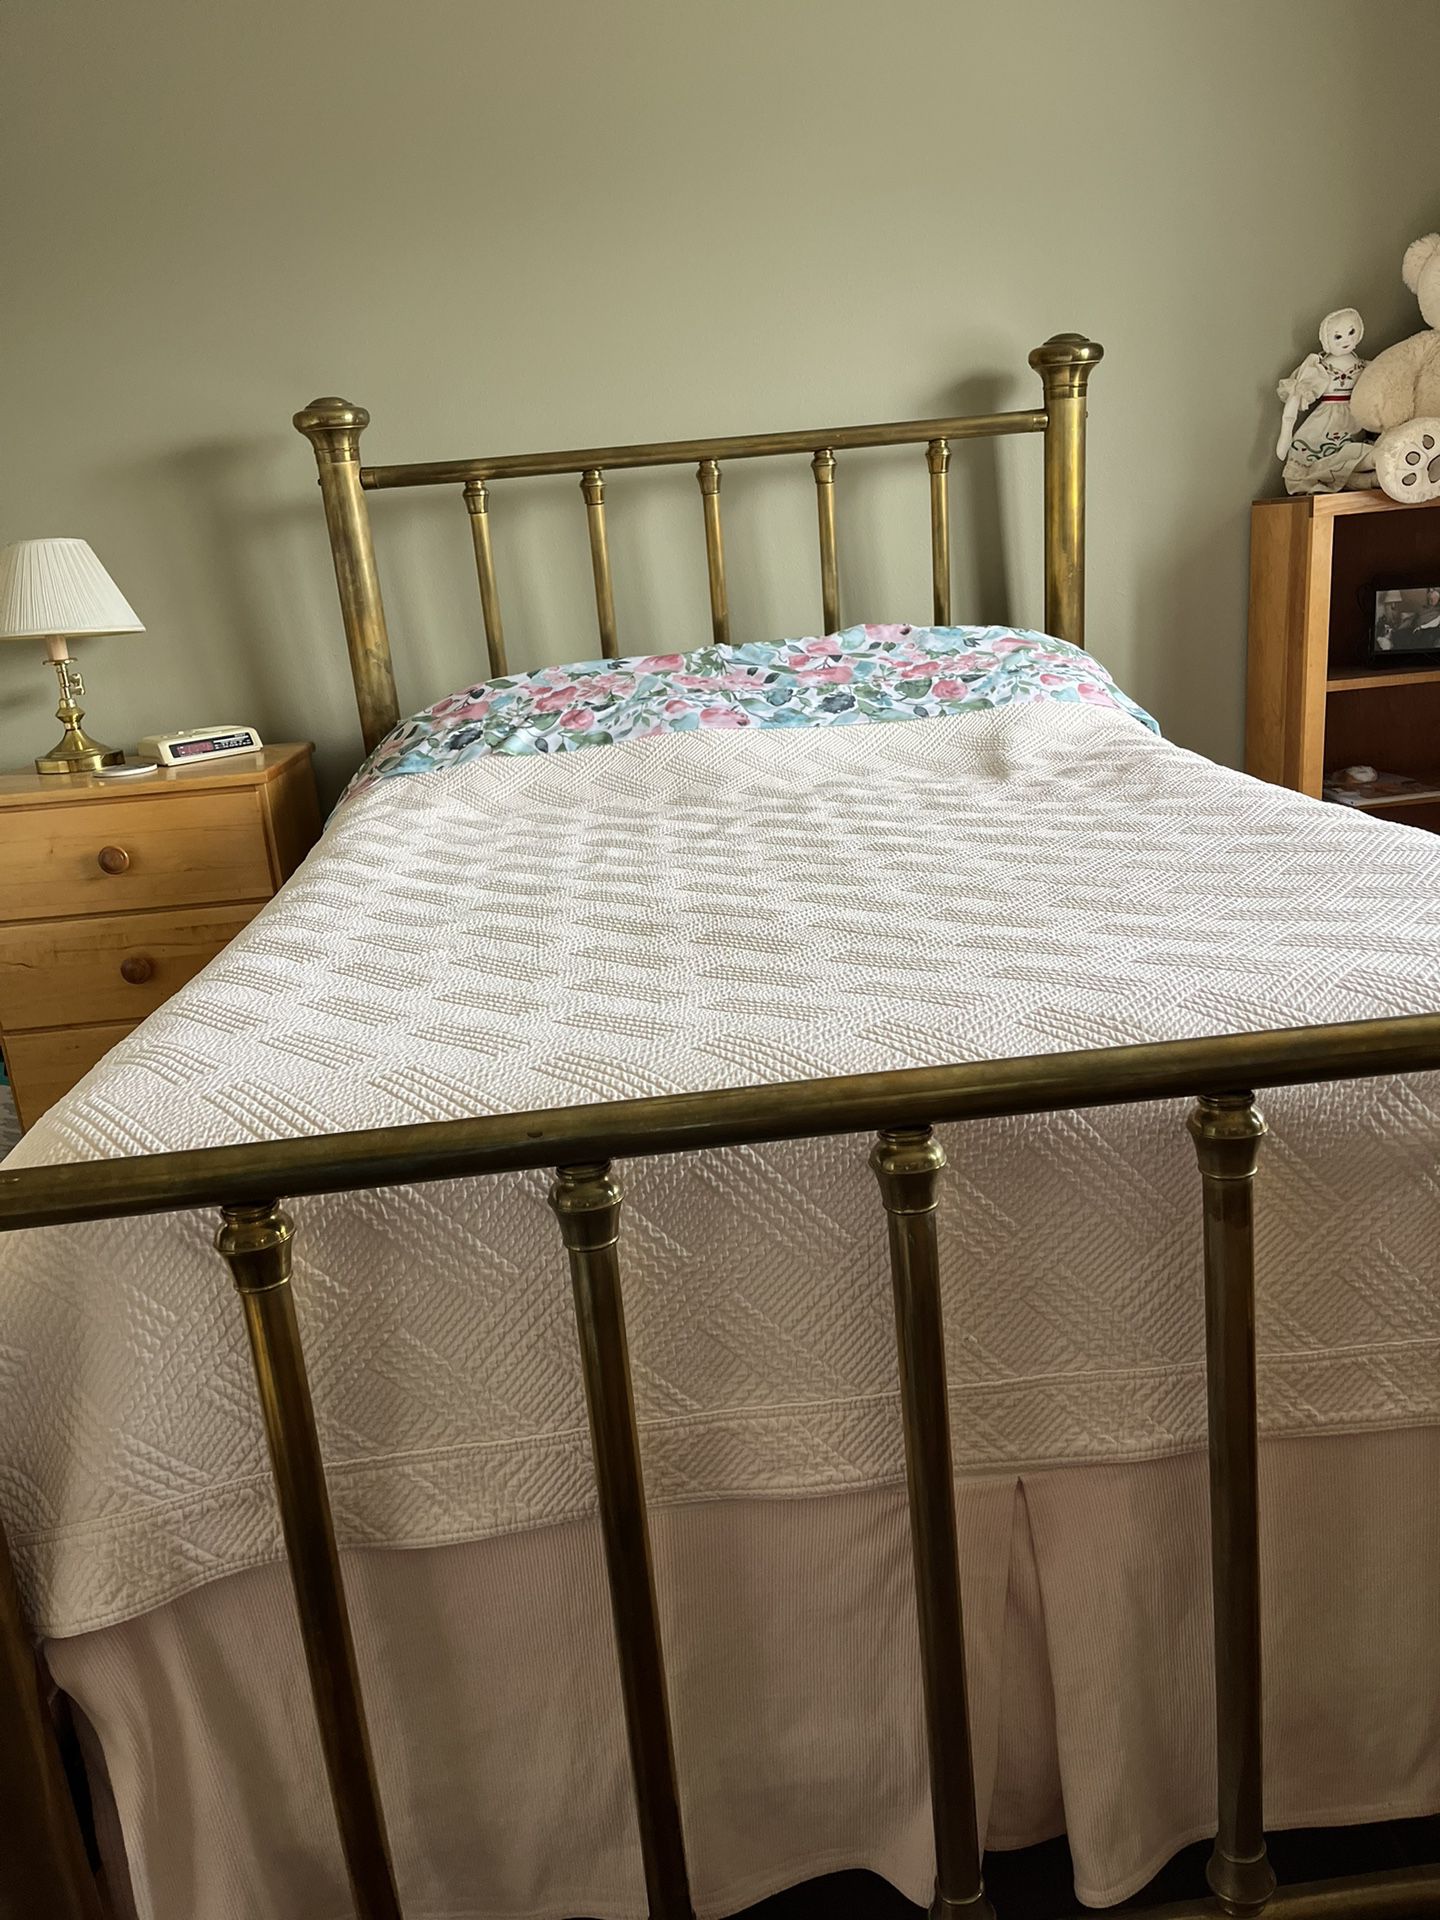 Must Sell Asap! Antique 1923 Full Brass Bed Set